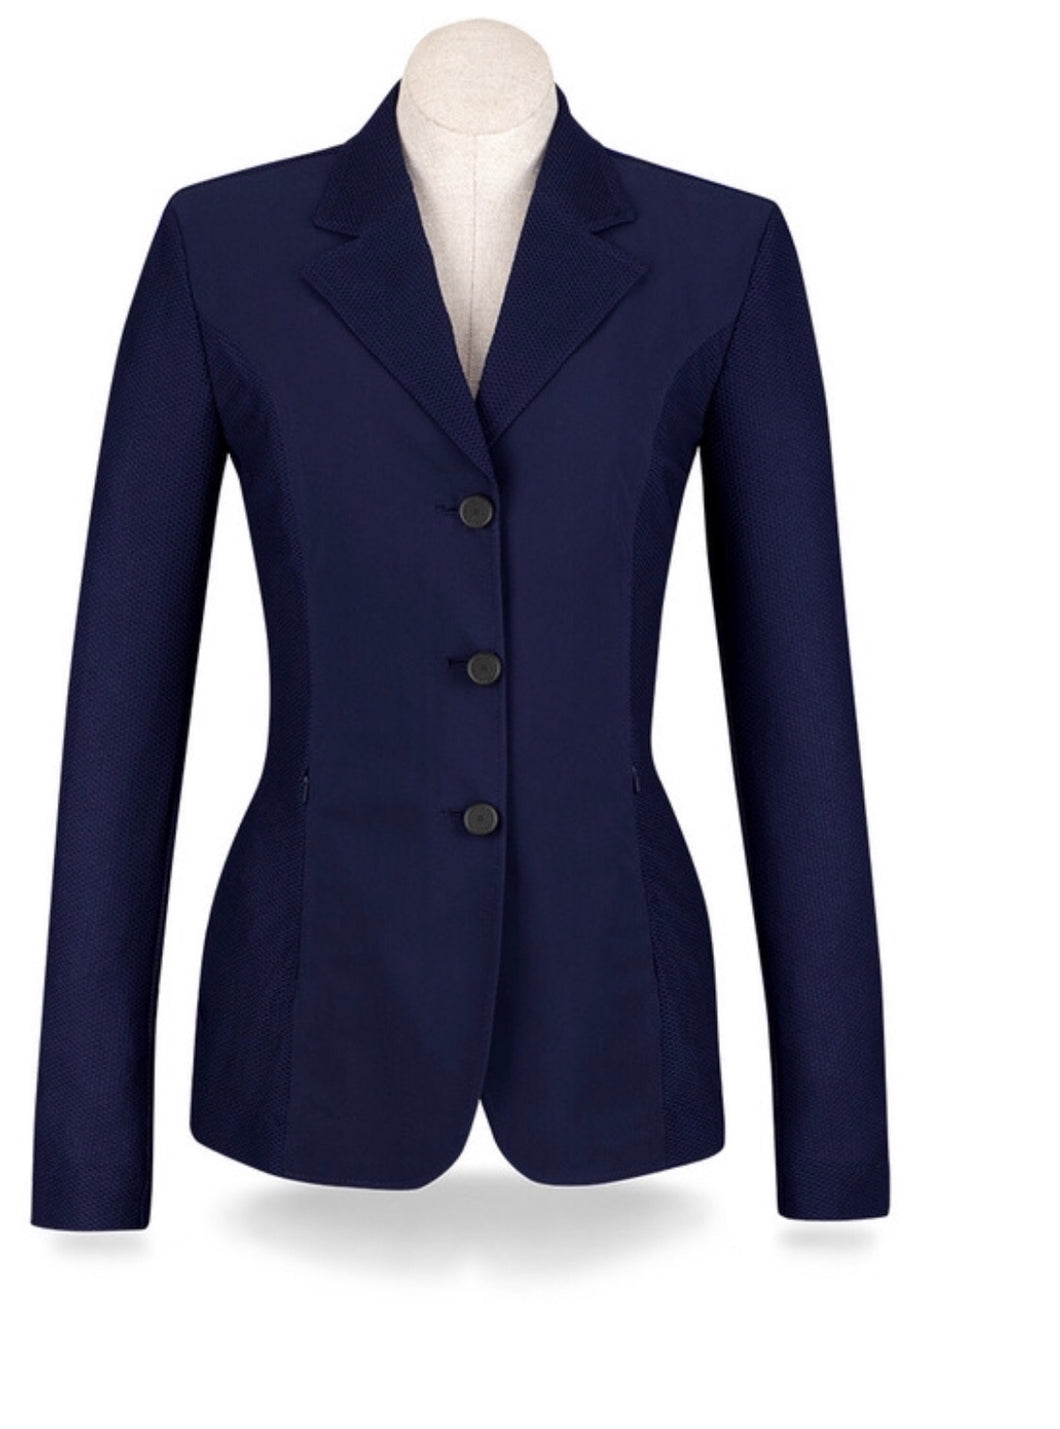 RJ Classics Harmony Show Coat - Navy Blue (also avail in Black & Green upon request)